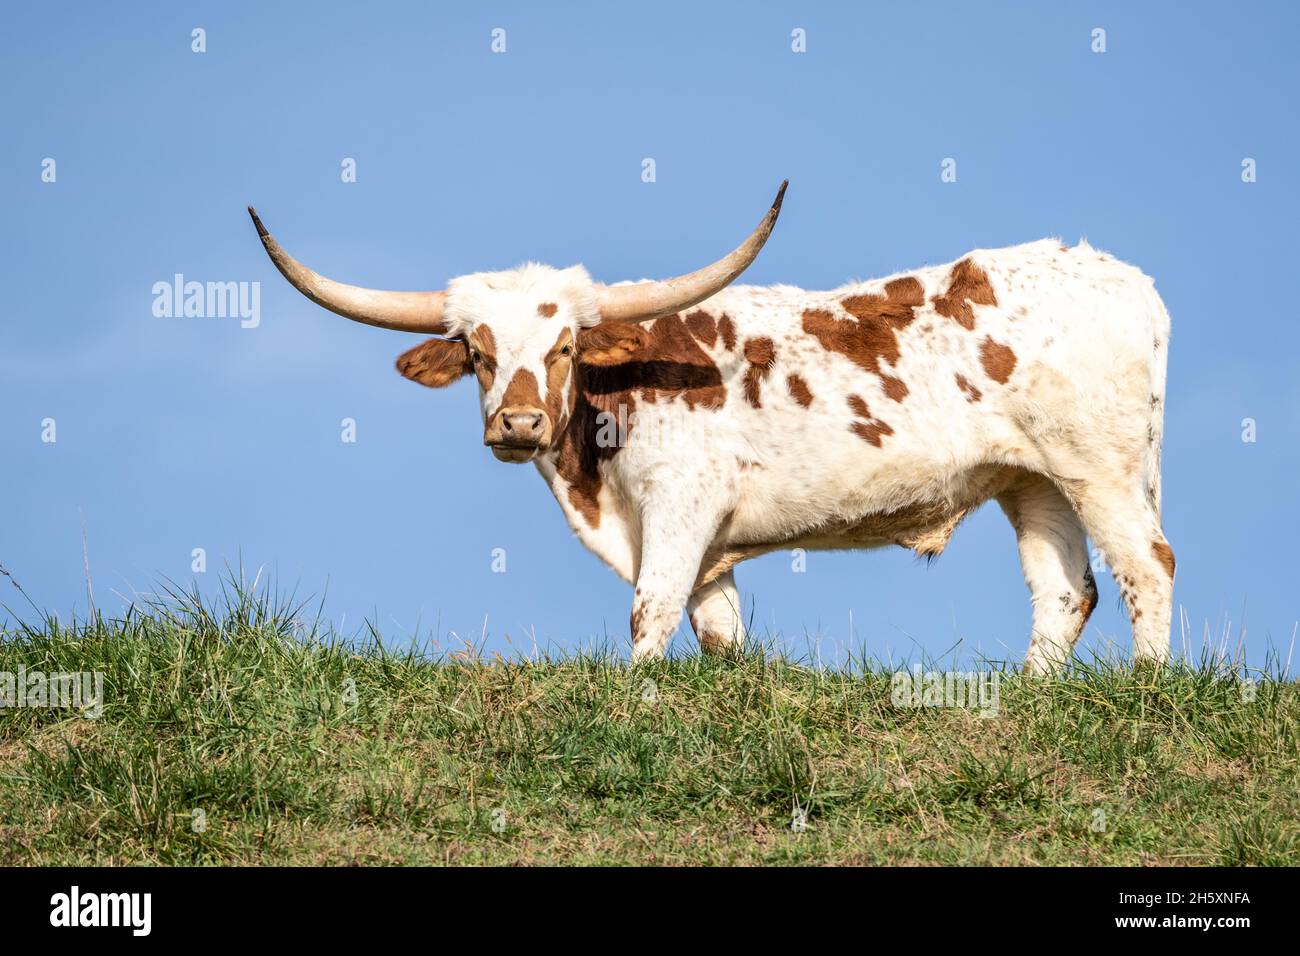 Texas longhorn cow stands grazing on green grassy hill. Photograph shot from low perspective Stock Photo